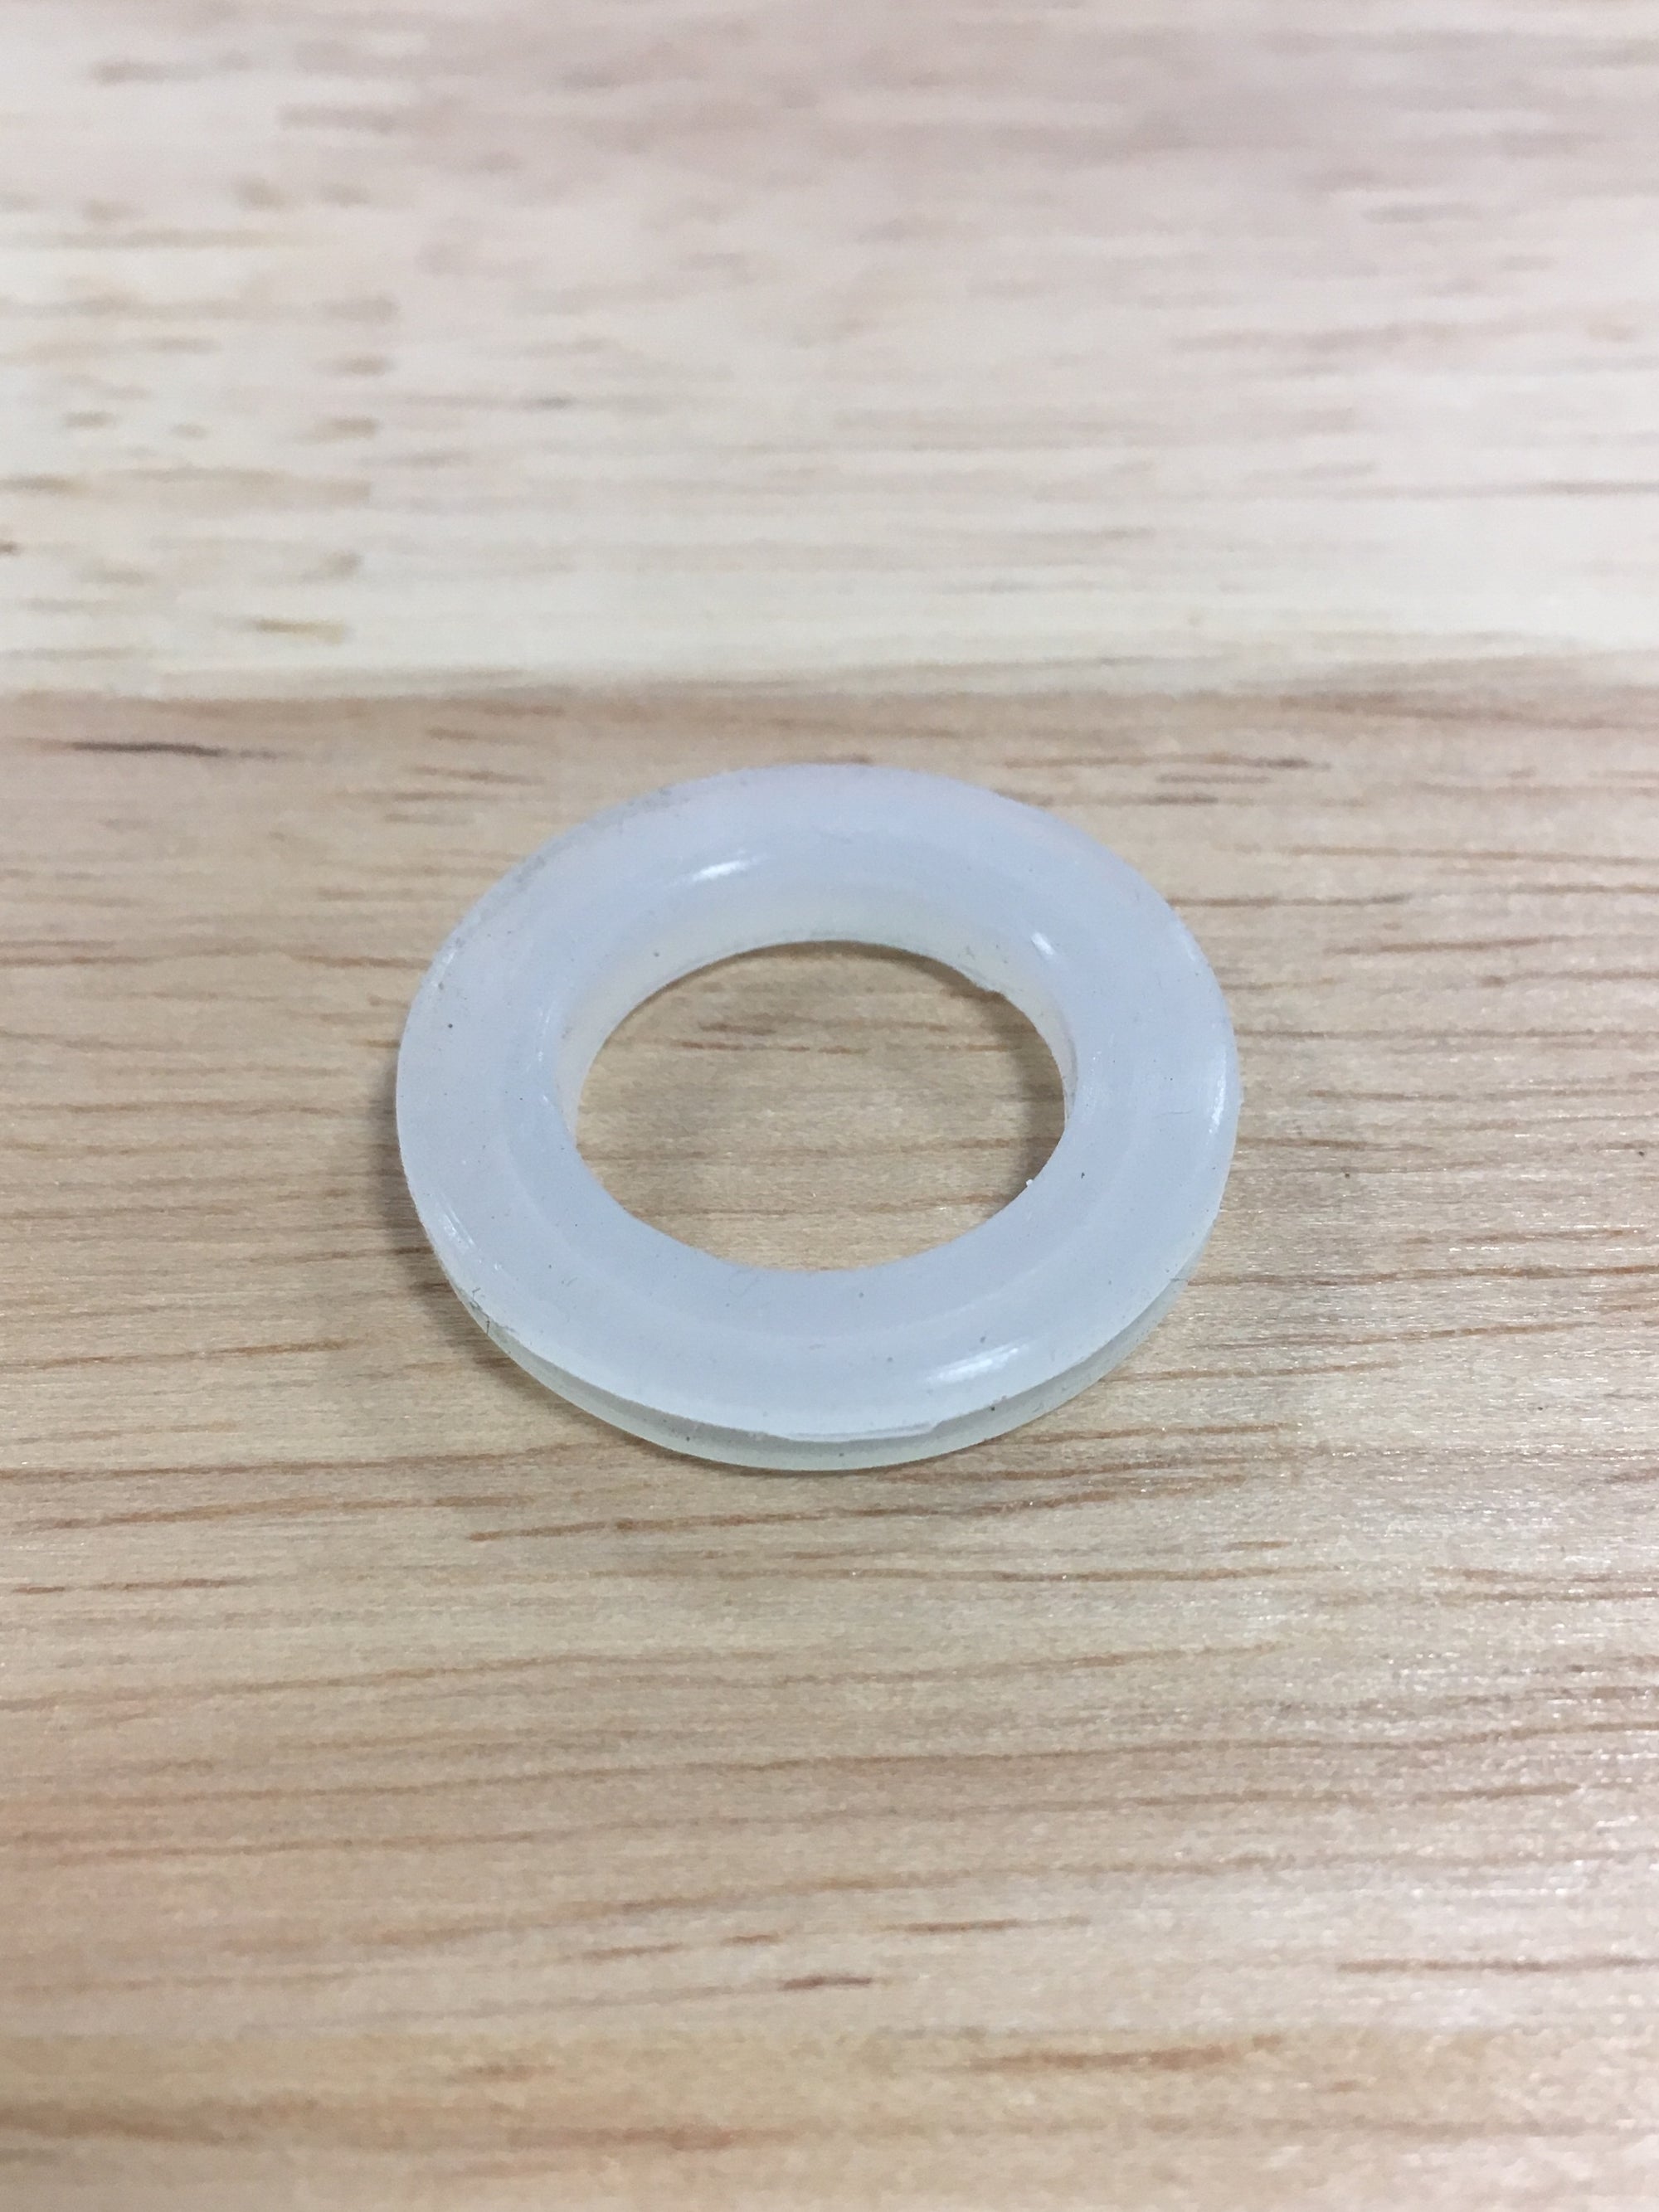 Grainfather Rubber Gasket for Inlet Pipe to Pump - All Things Fermented | Home Brew Shop NZ | Supplies | Equipment